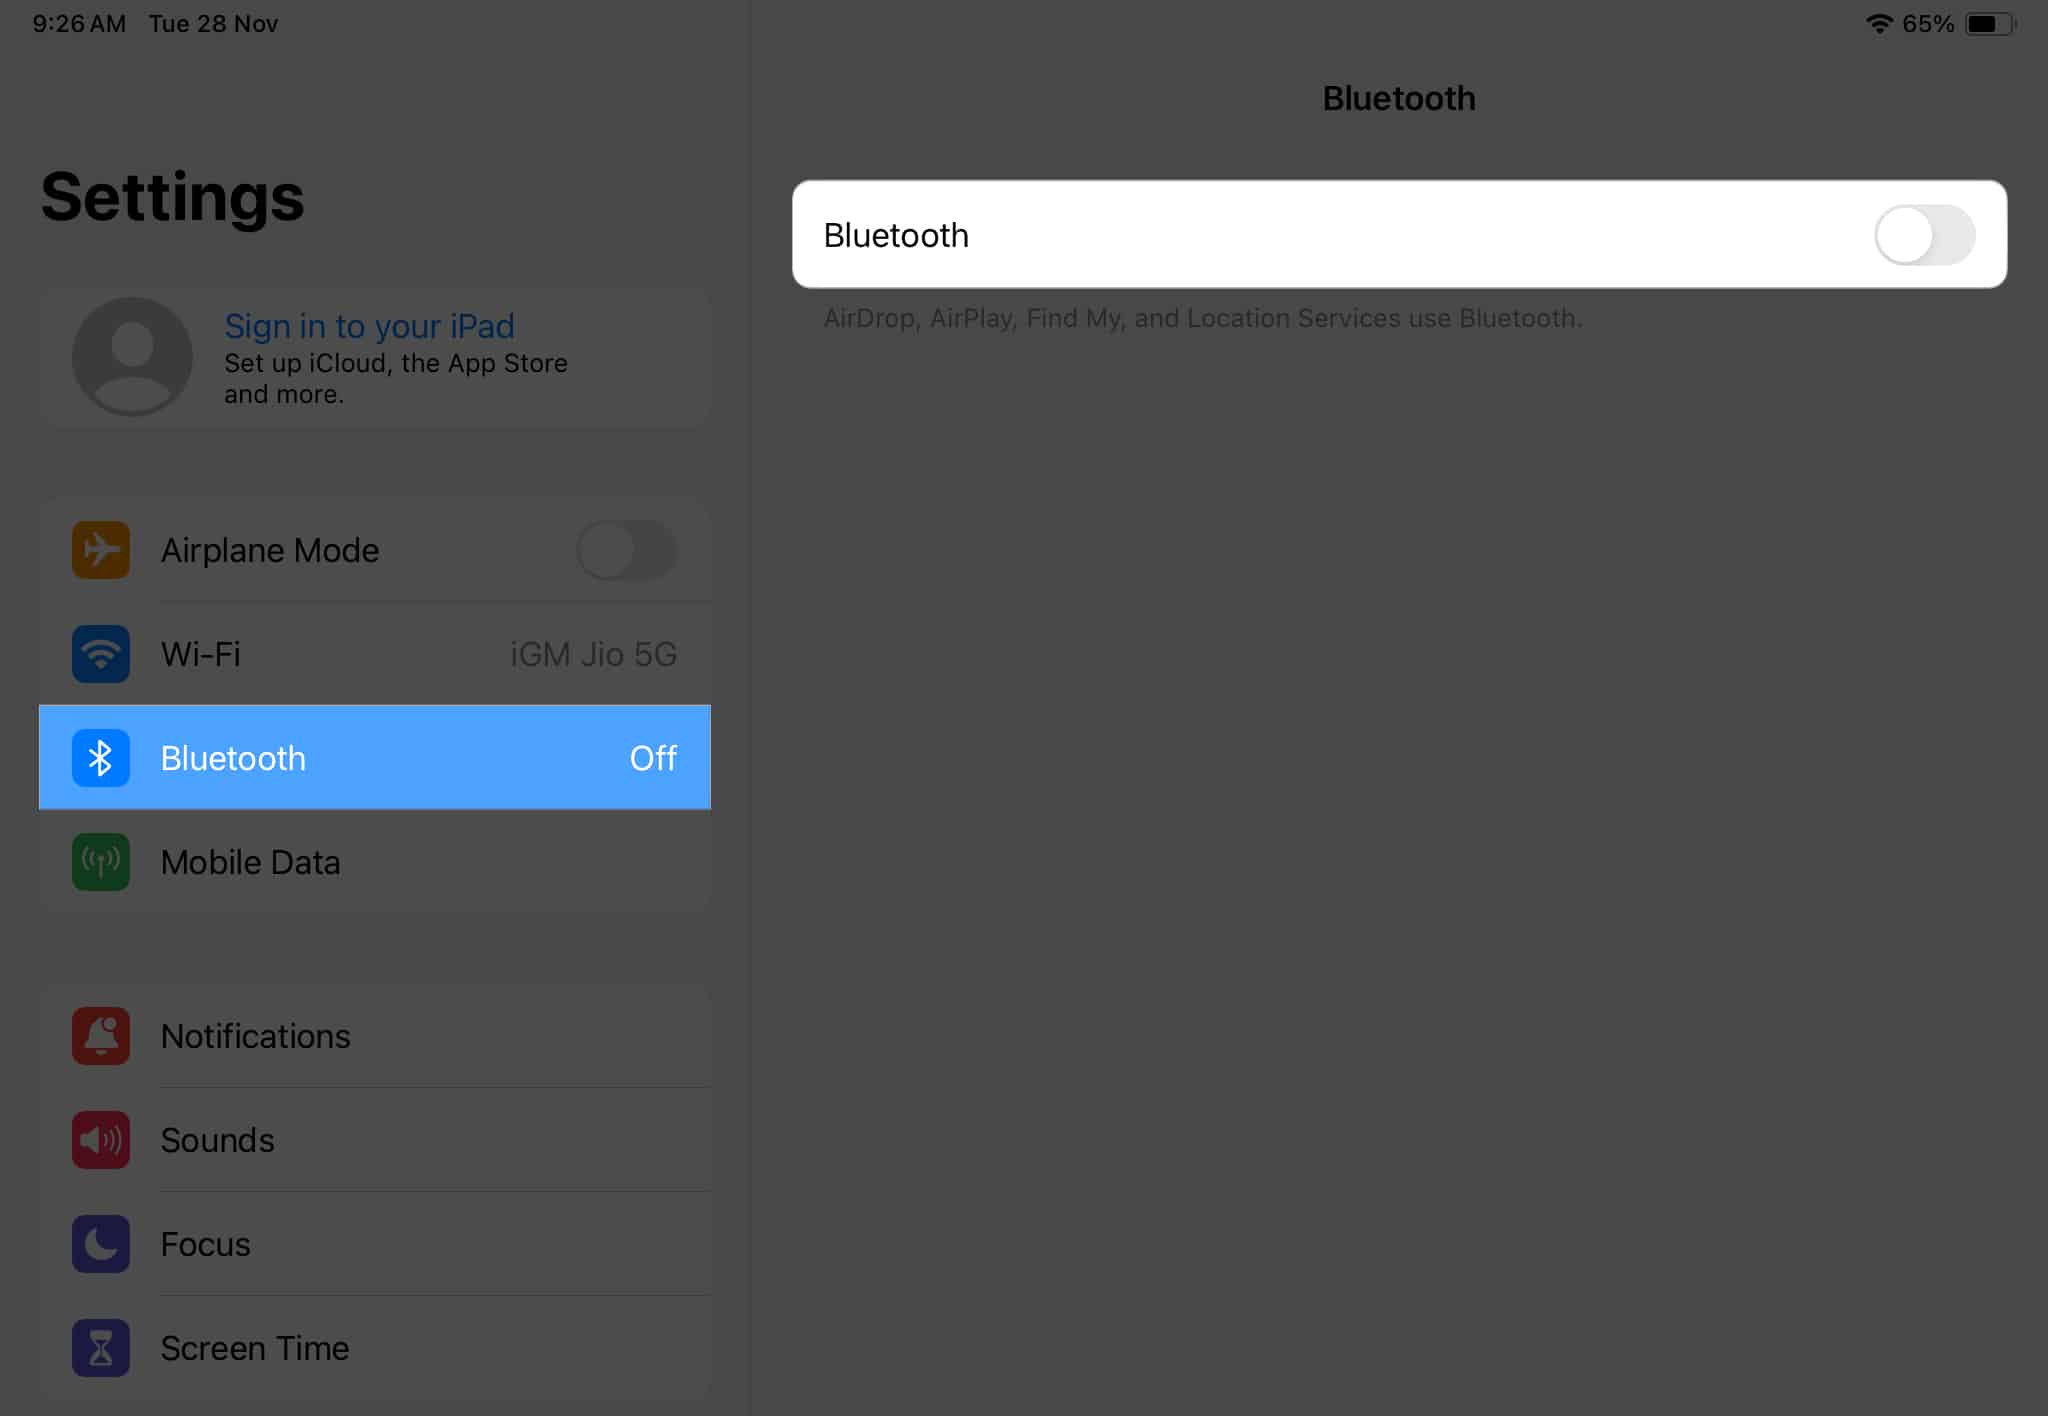 Disable and enable Bluetooth on iPad